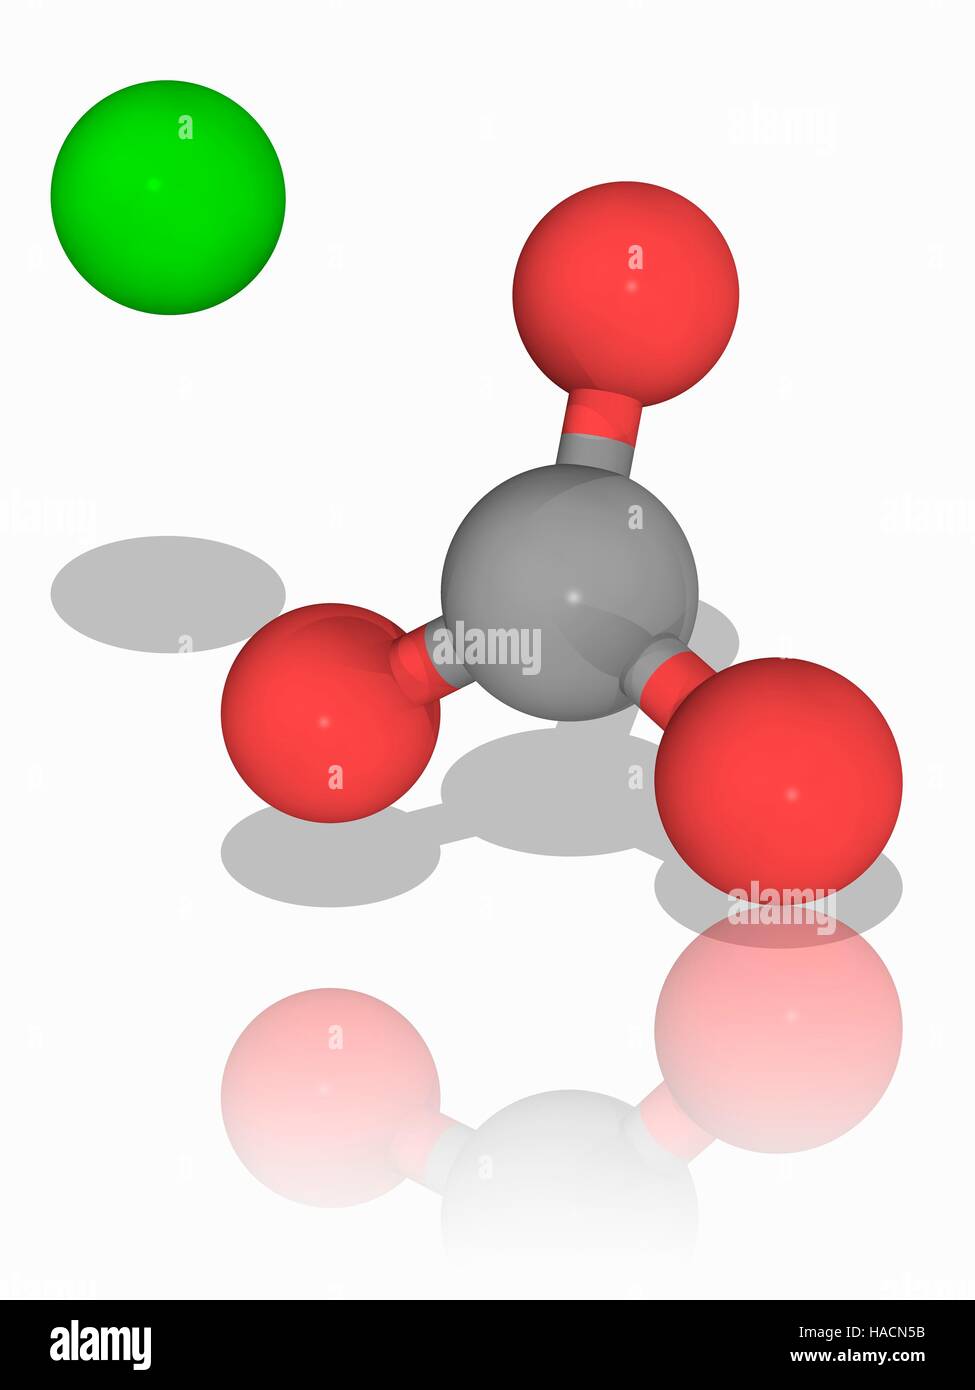 Calcium carbonate. Molecular model of the ionic mineral calcium carbonate (Ca.CO3). This chemical forms the main component of the shells of marine organisms and egg shells, and is an abundant mineral deposit that formed under ancient seas. Atoms and ions are represented as spheres and are colour-coded: calcium (green), carbon (grey) and oxygen (red). The calcium ion and the carbonate ion have a double positive and negative charge respectively. Illustration. Stock Photo